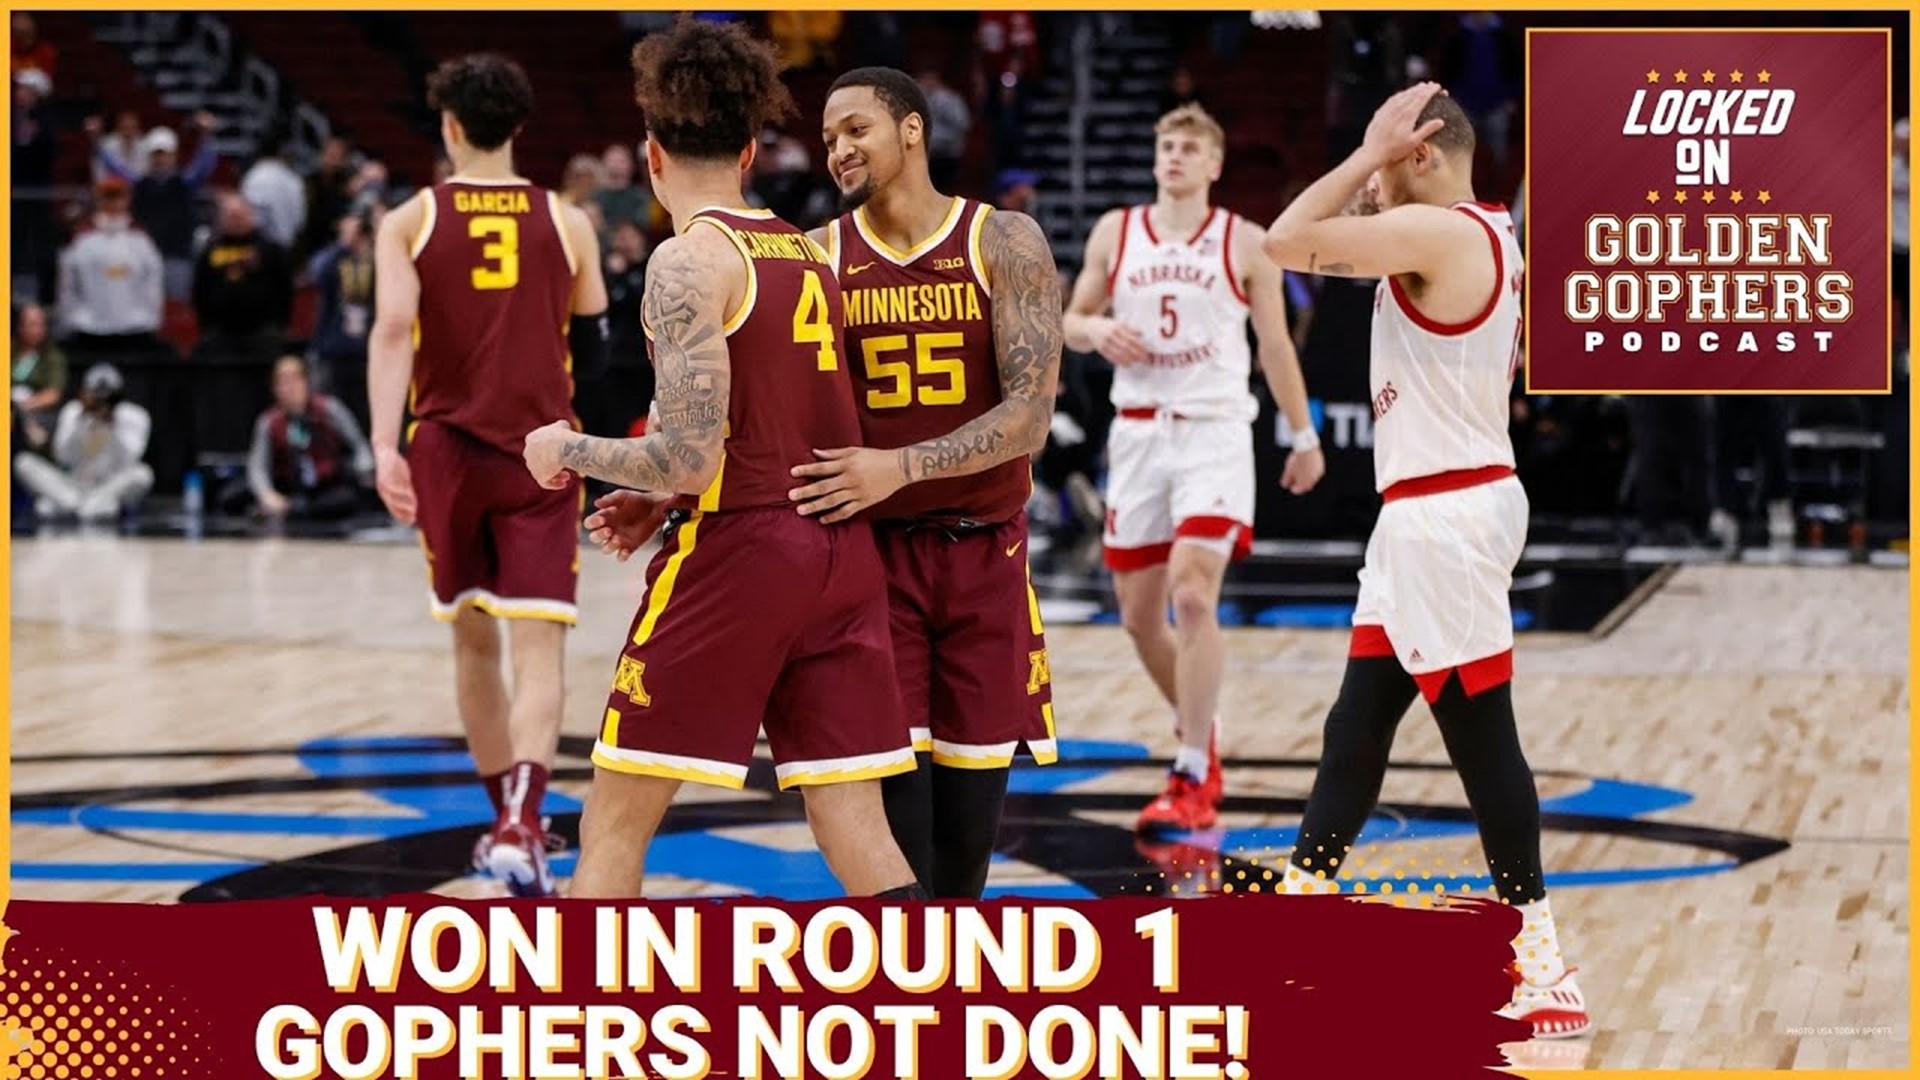 The Minnesota Gophers pull off the upset in round 1 of the Big Ten Tournament against the Nebraska Cornhuskers. Can the Gophers keep the run alive?